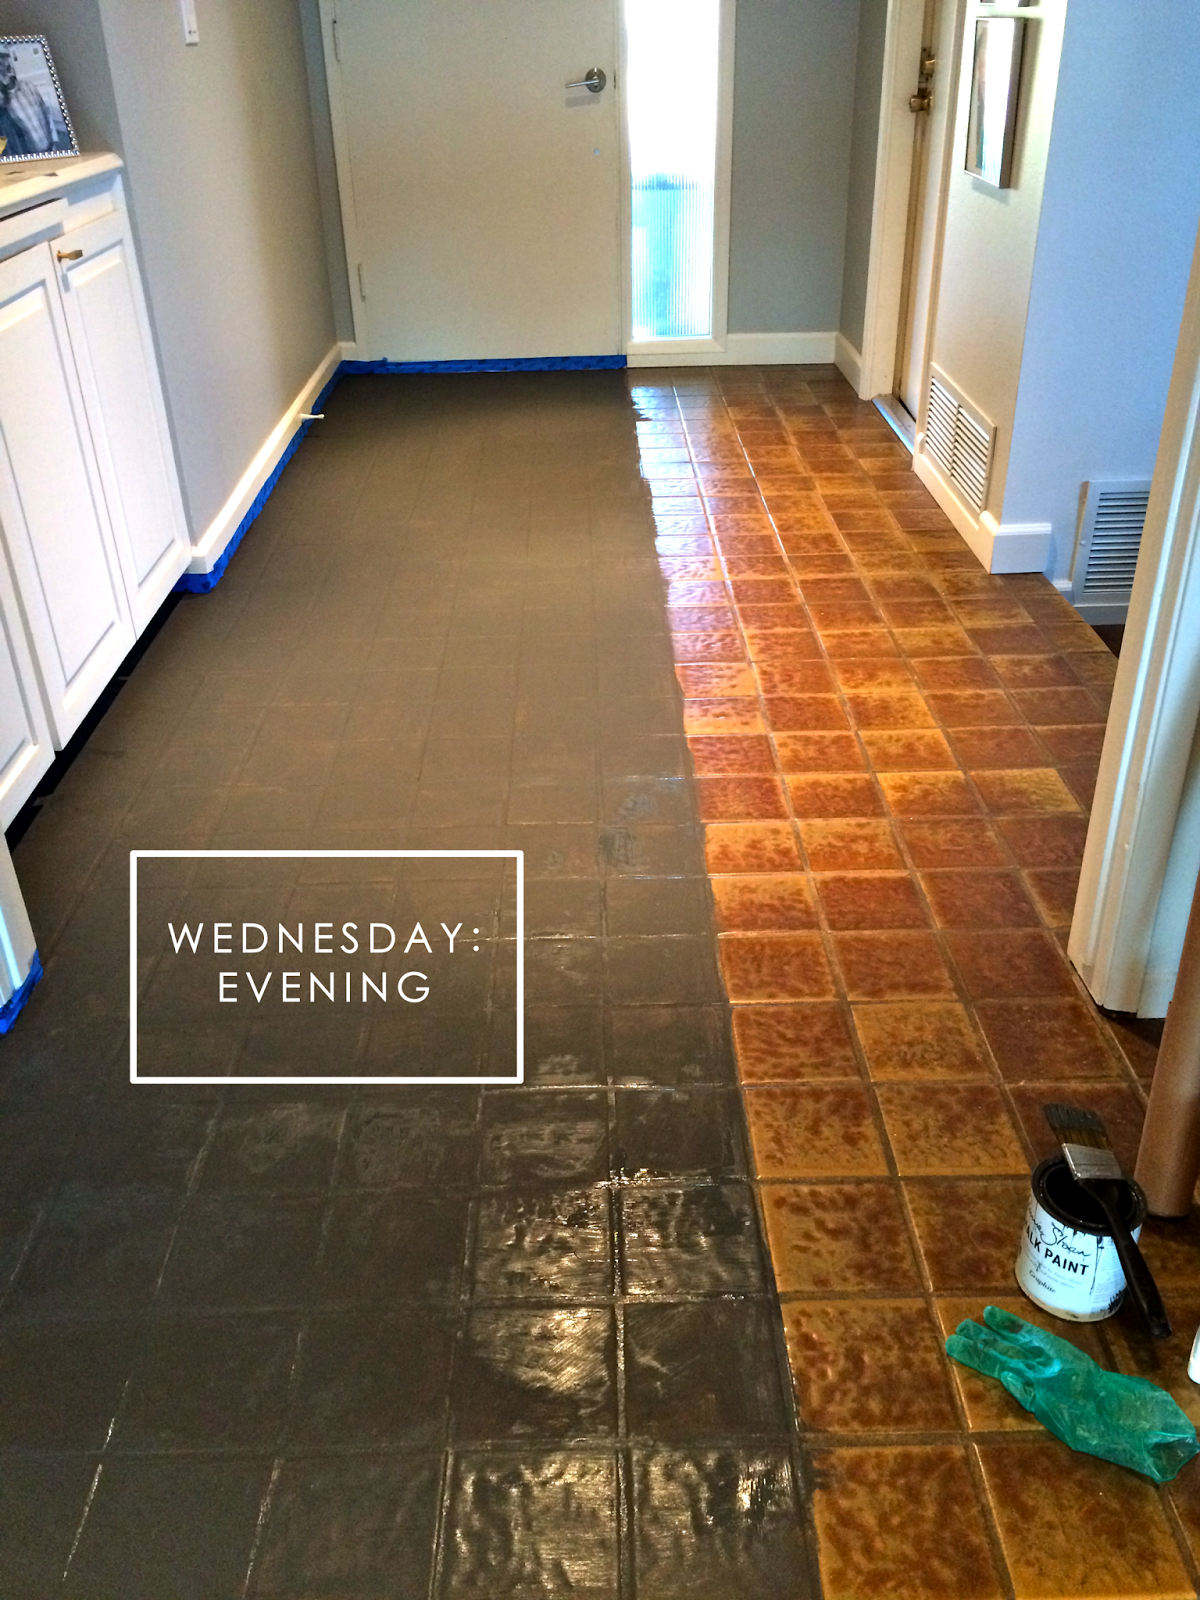 Project Fail Painted Tile Floors Holtwood Hipster